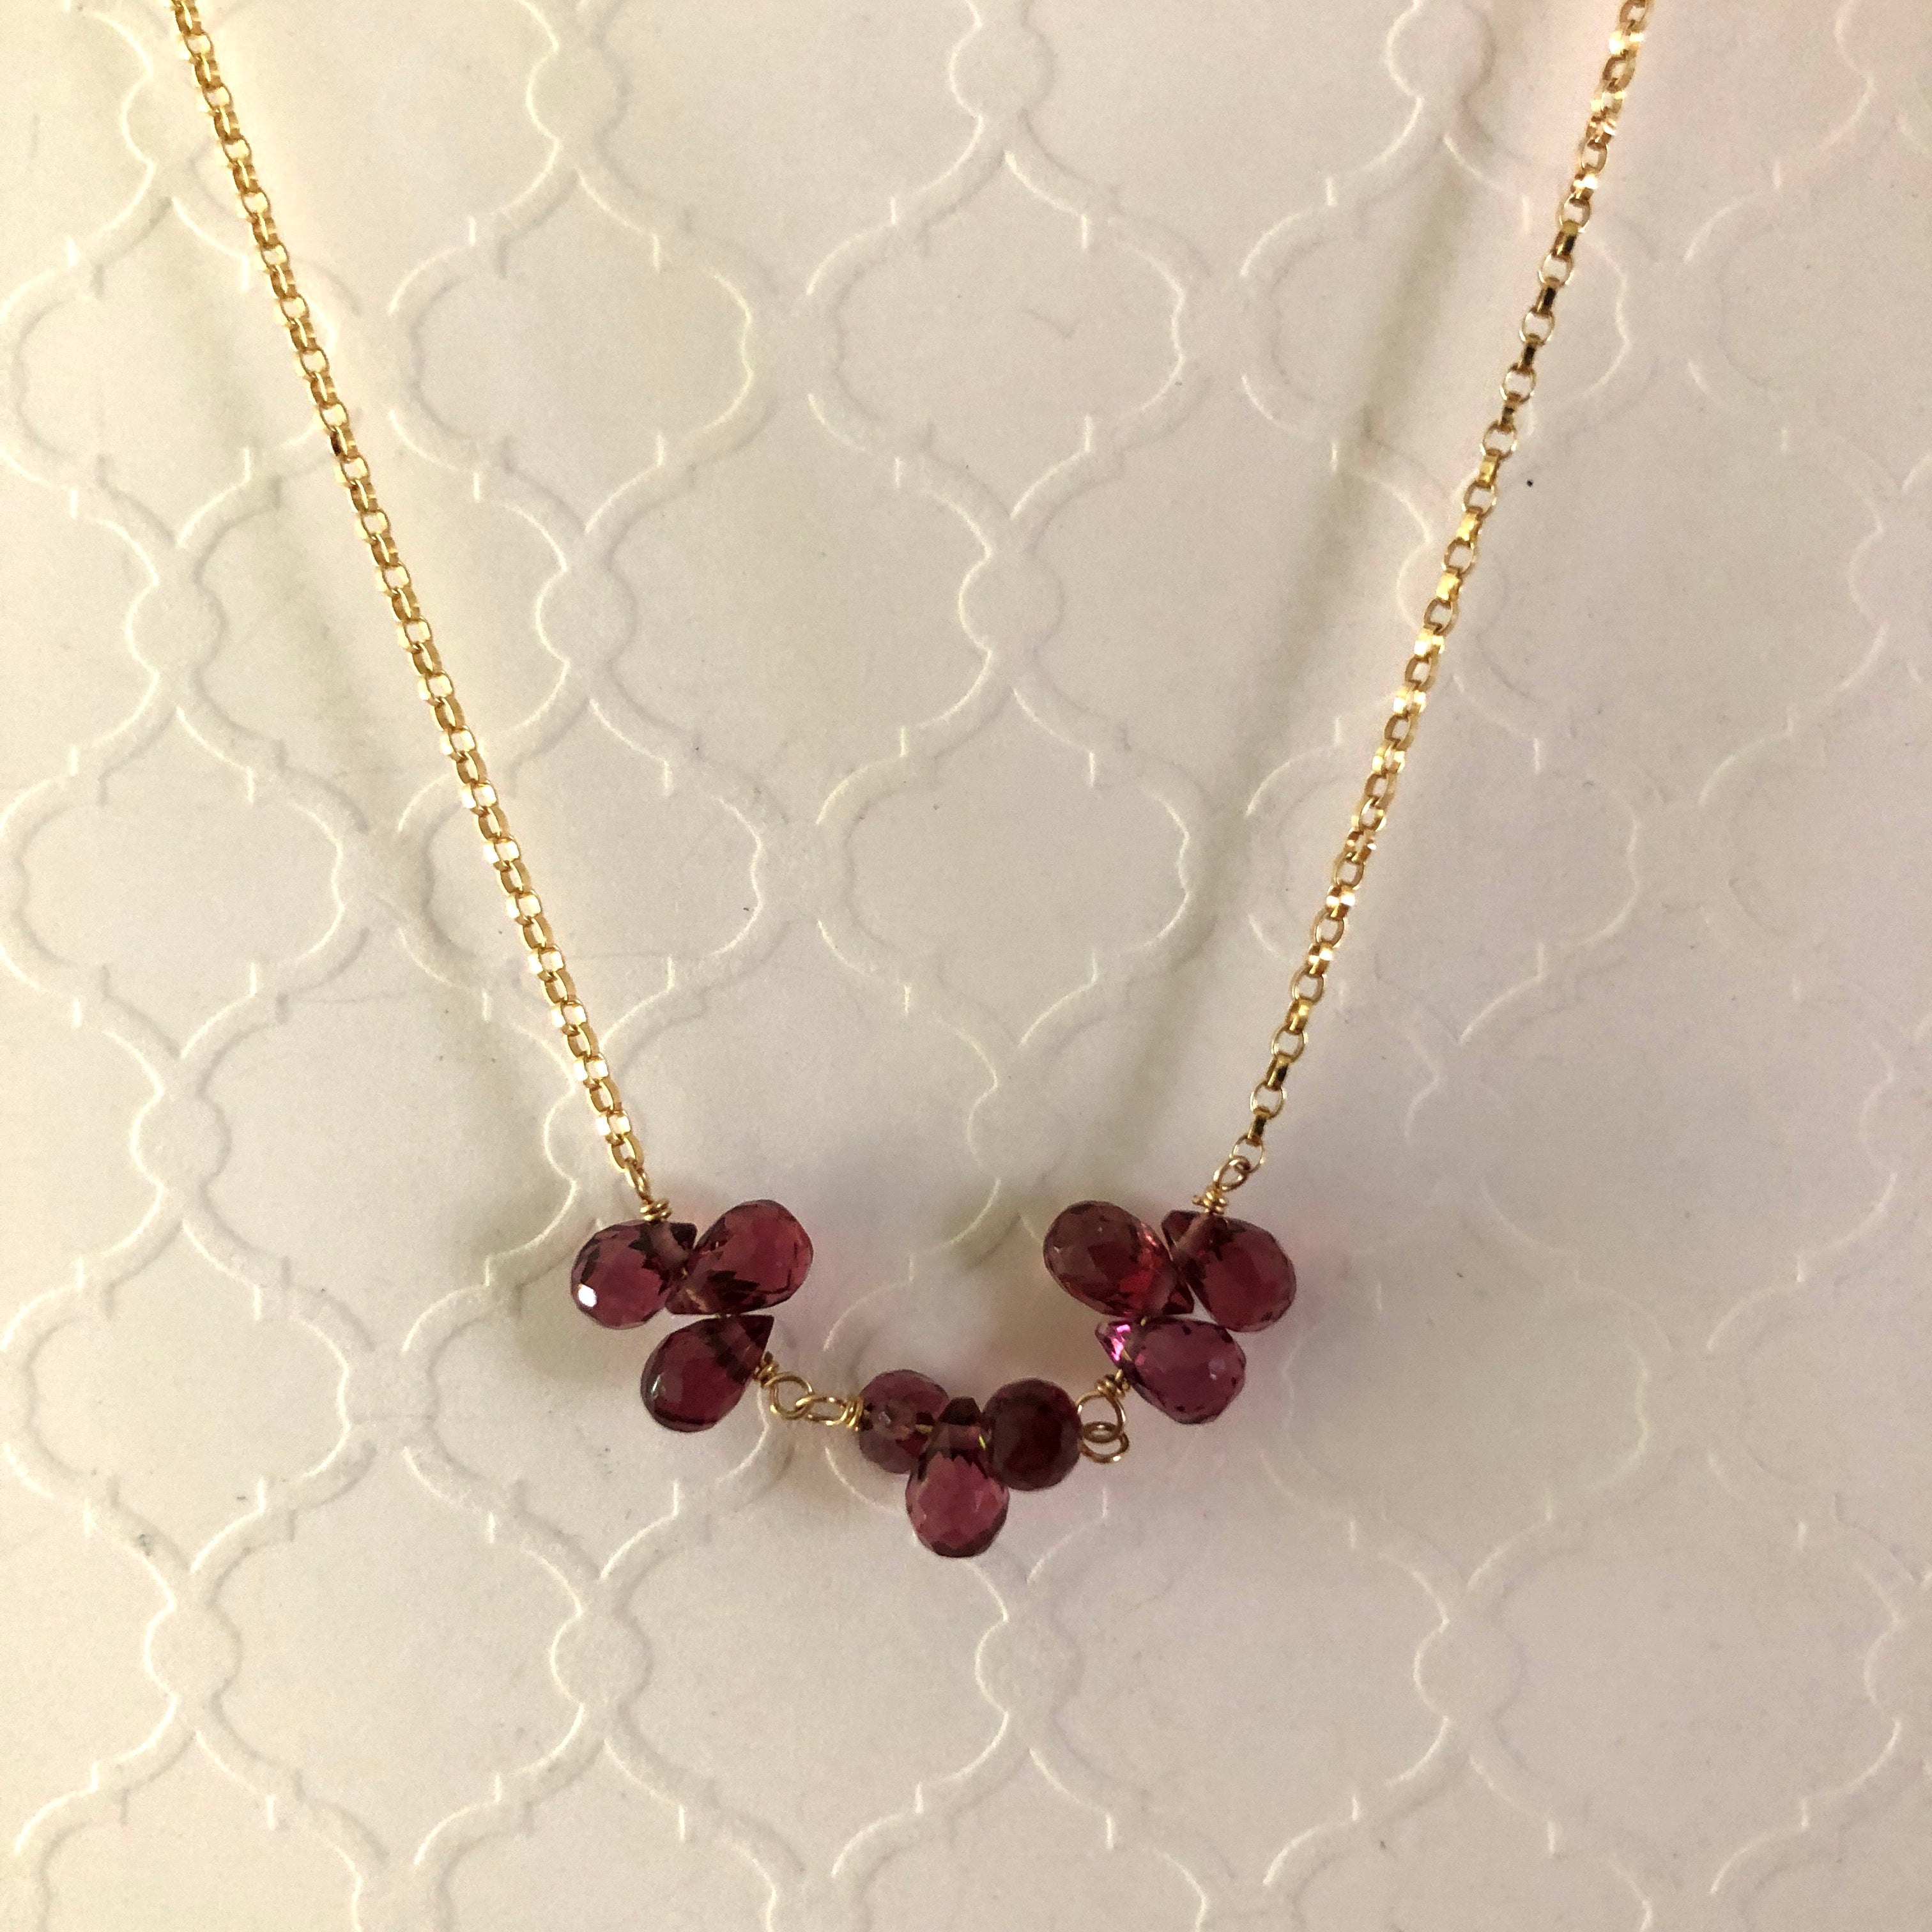 petal necklace - garnet briolettes with gold-filled chain